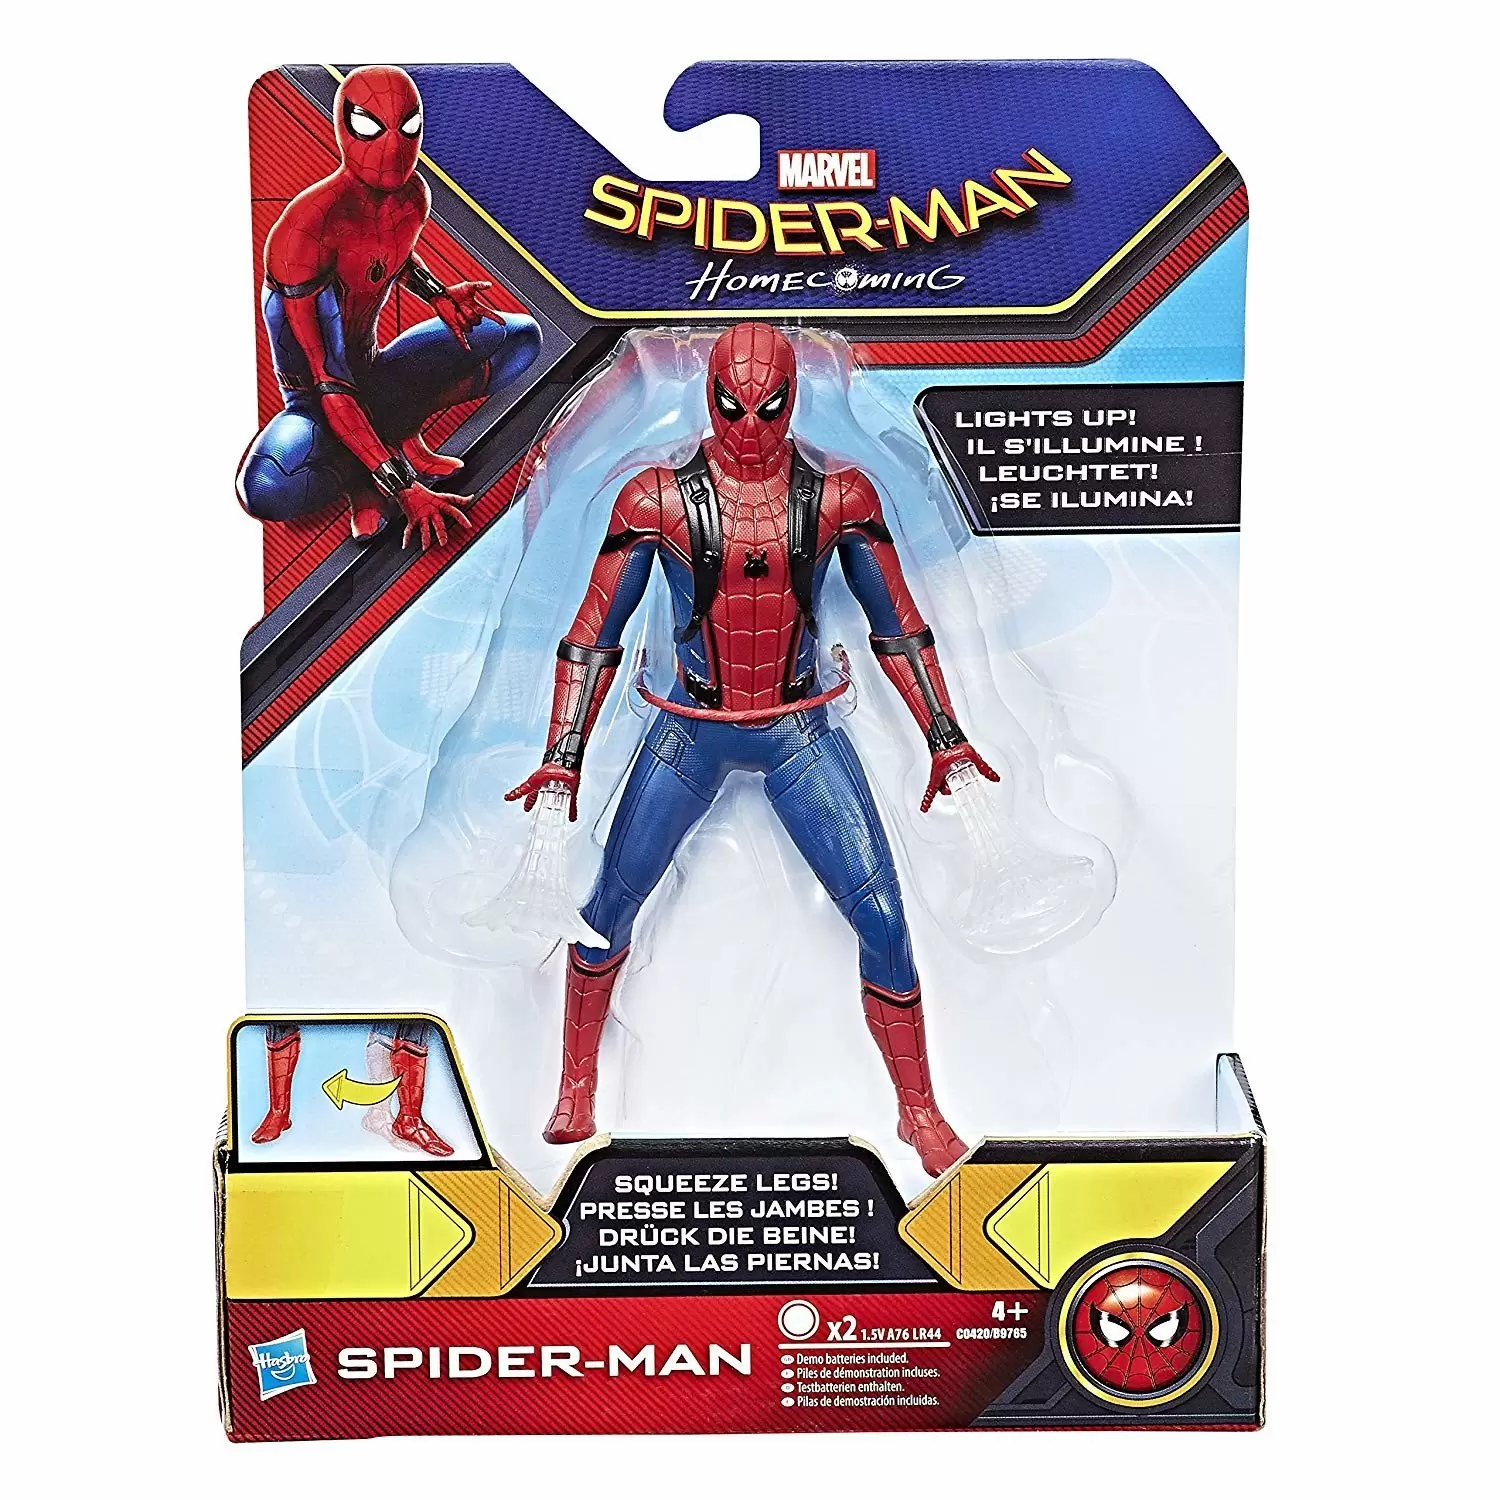 Feature Action Figure Wave 1 Set - Spider-Man Homecoming - Spider-Man